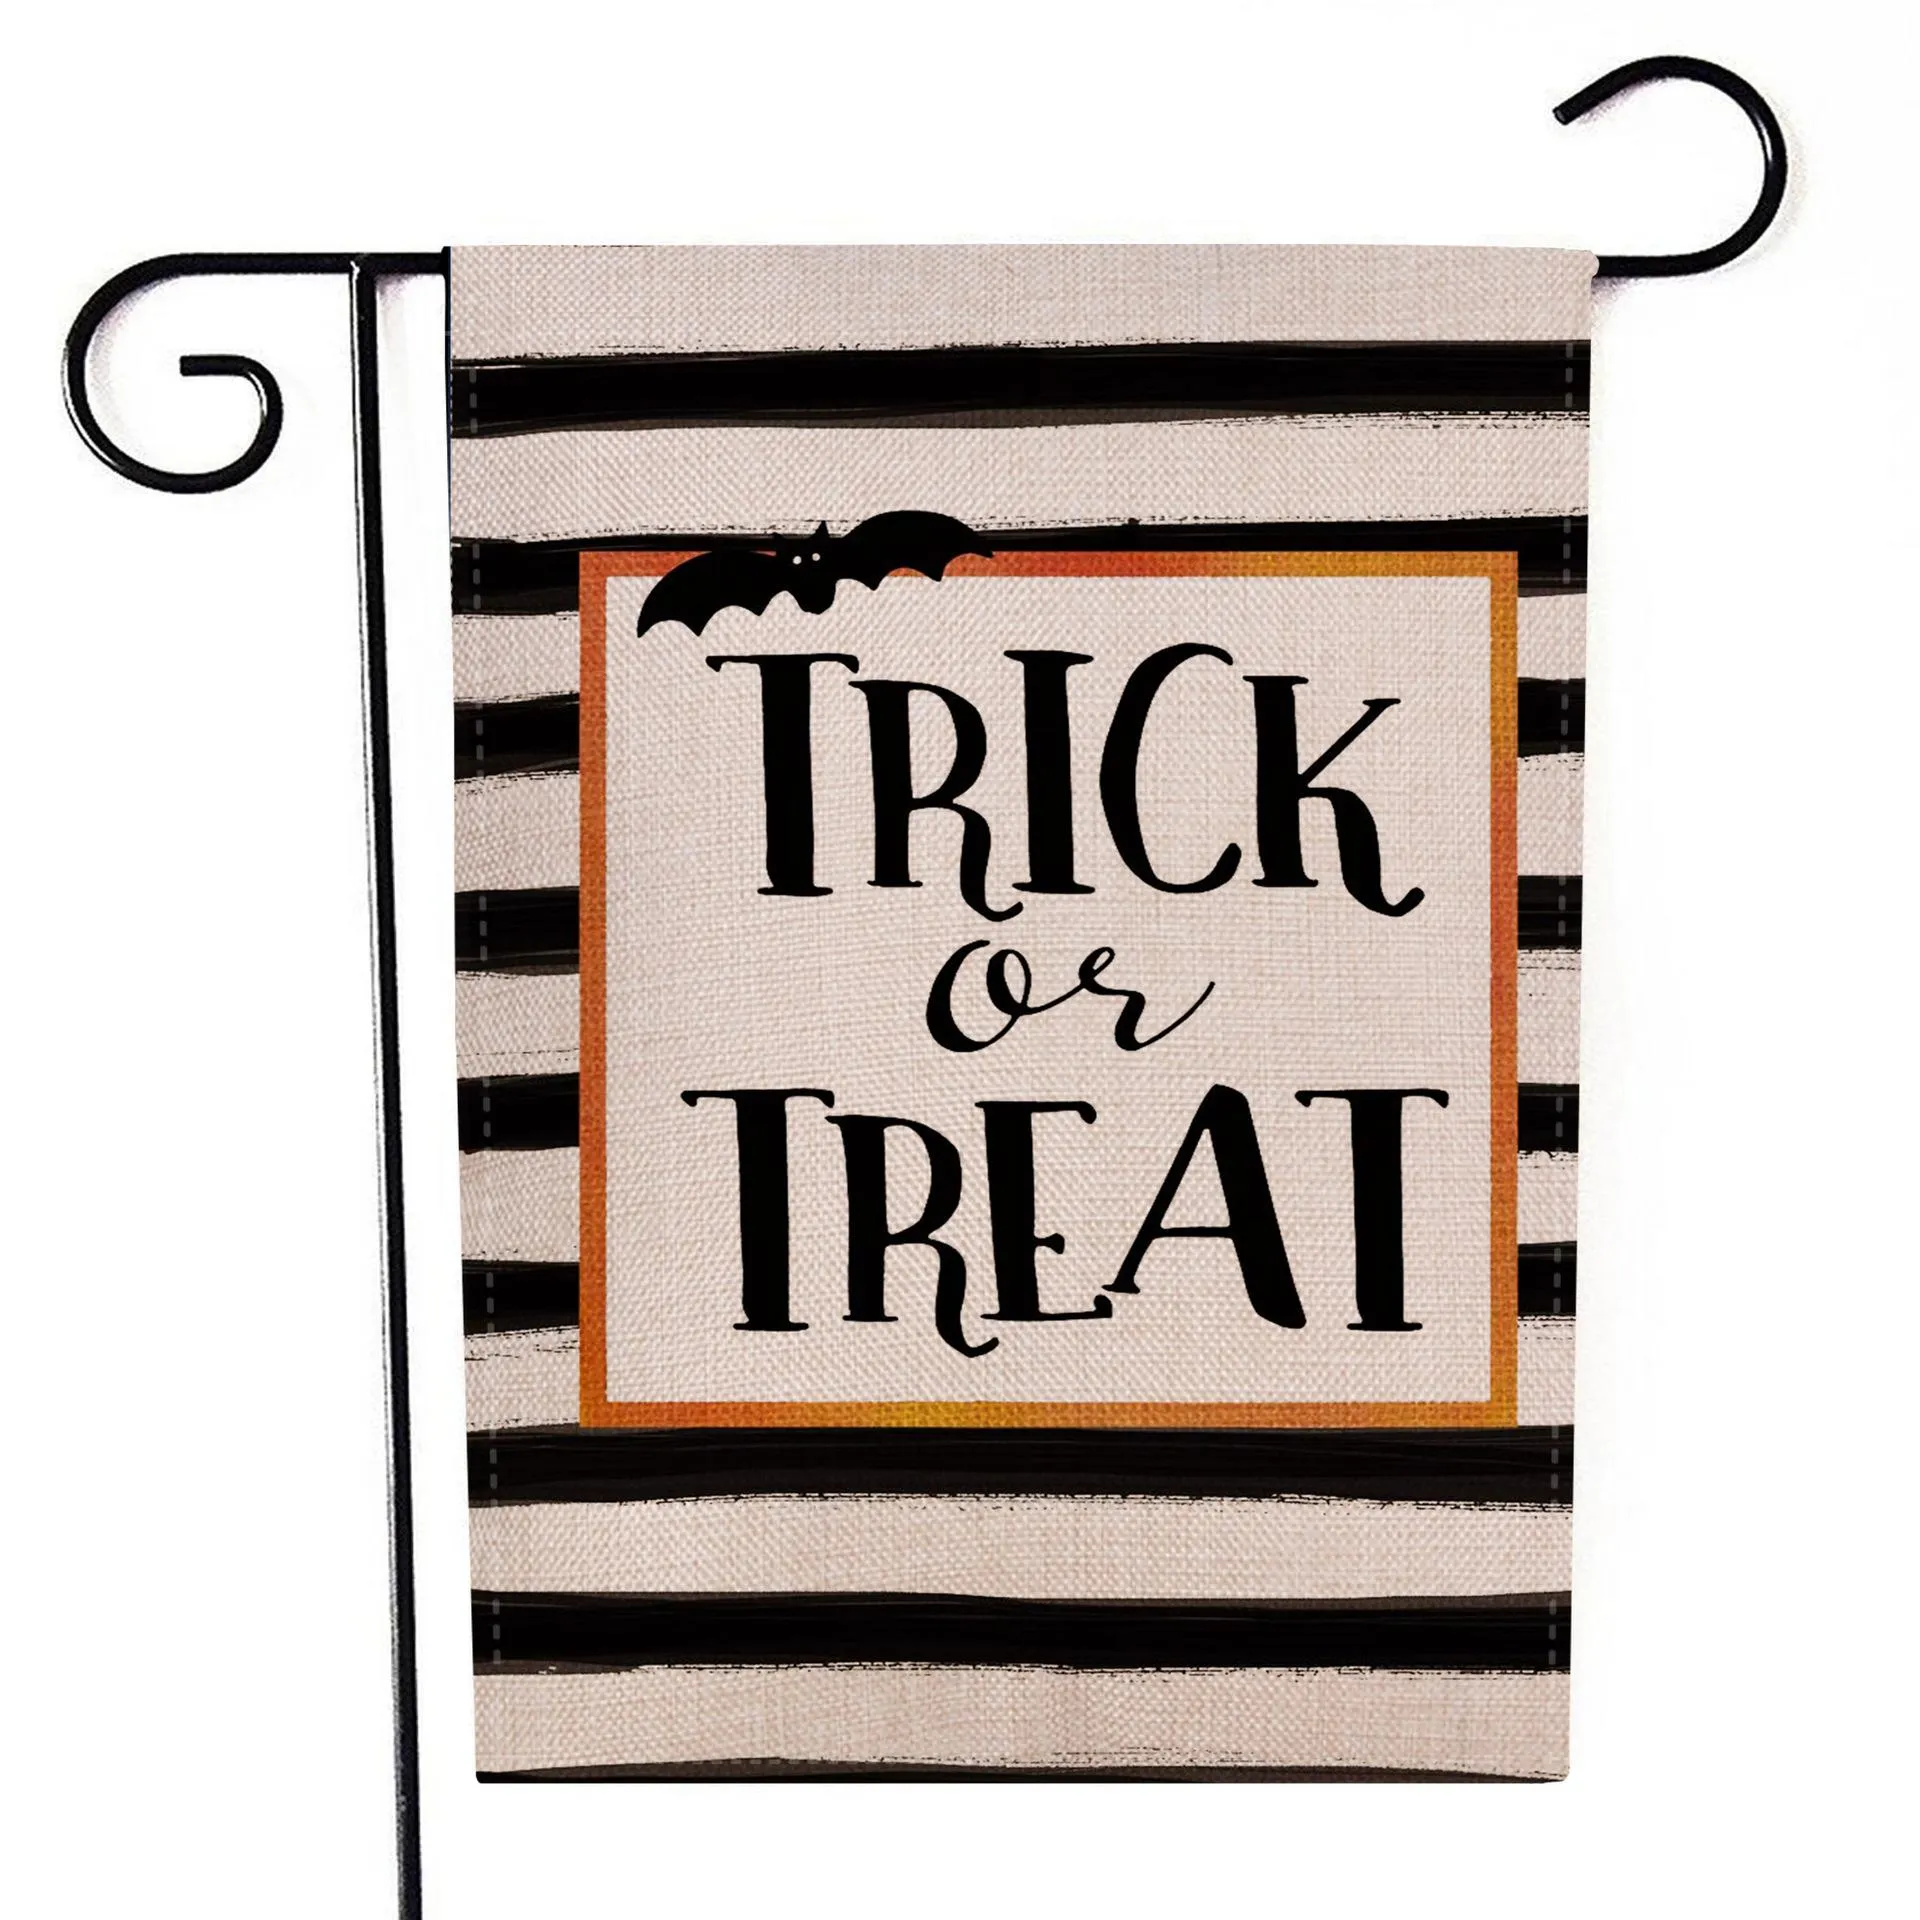 Halloween Linen Yard Garden Flag Trick Treat Ghost Happy Garden Decoration Flags For Outdoor Double-sided Decorative Yards 9 Style Free DHL HH9-3279